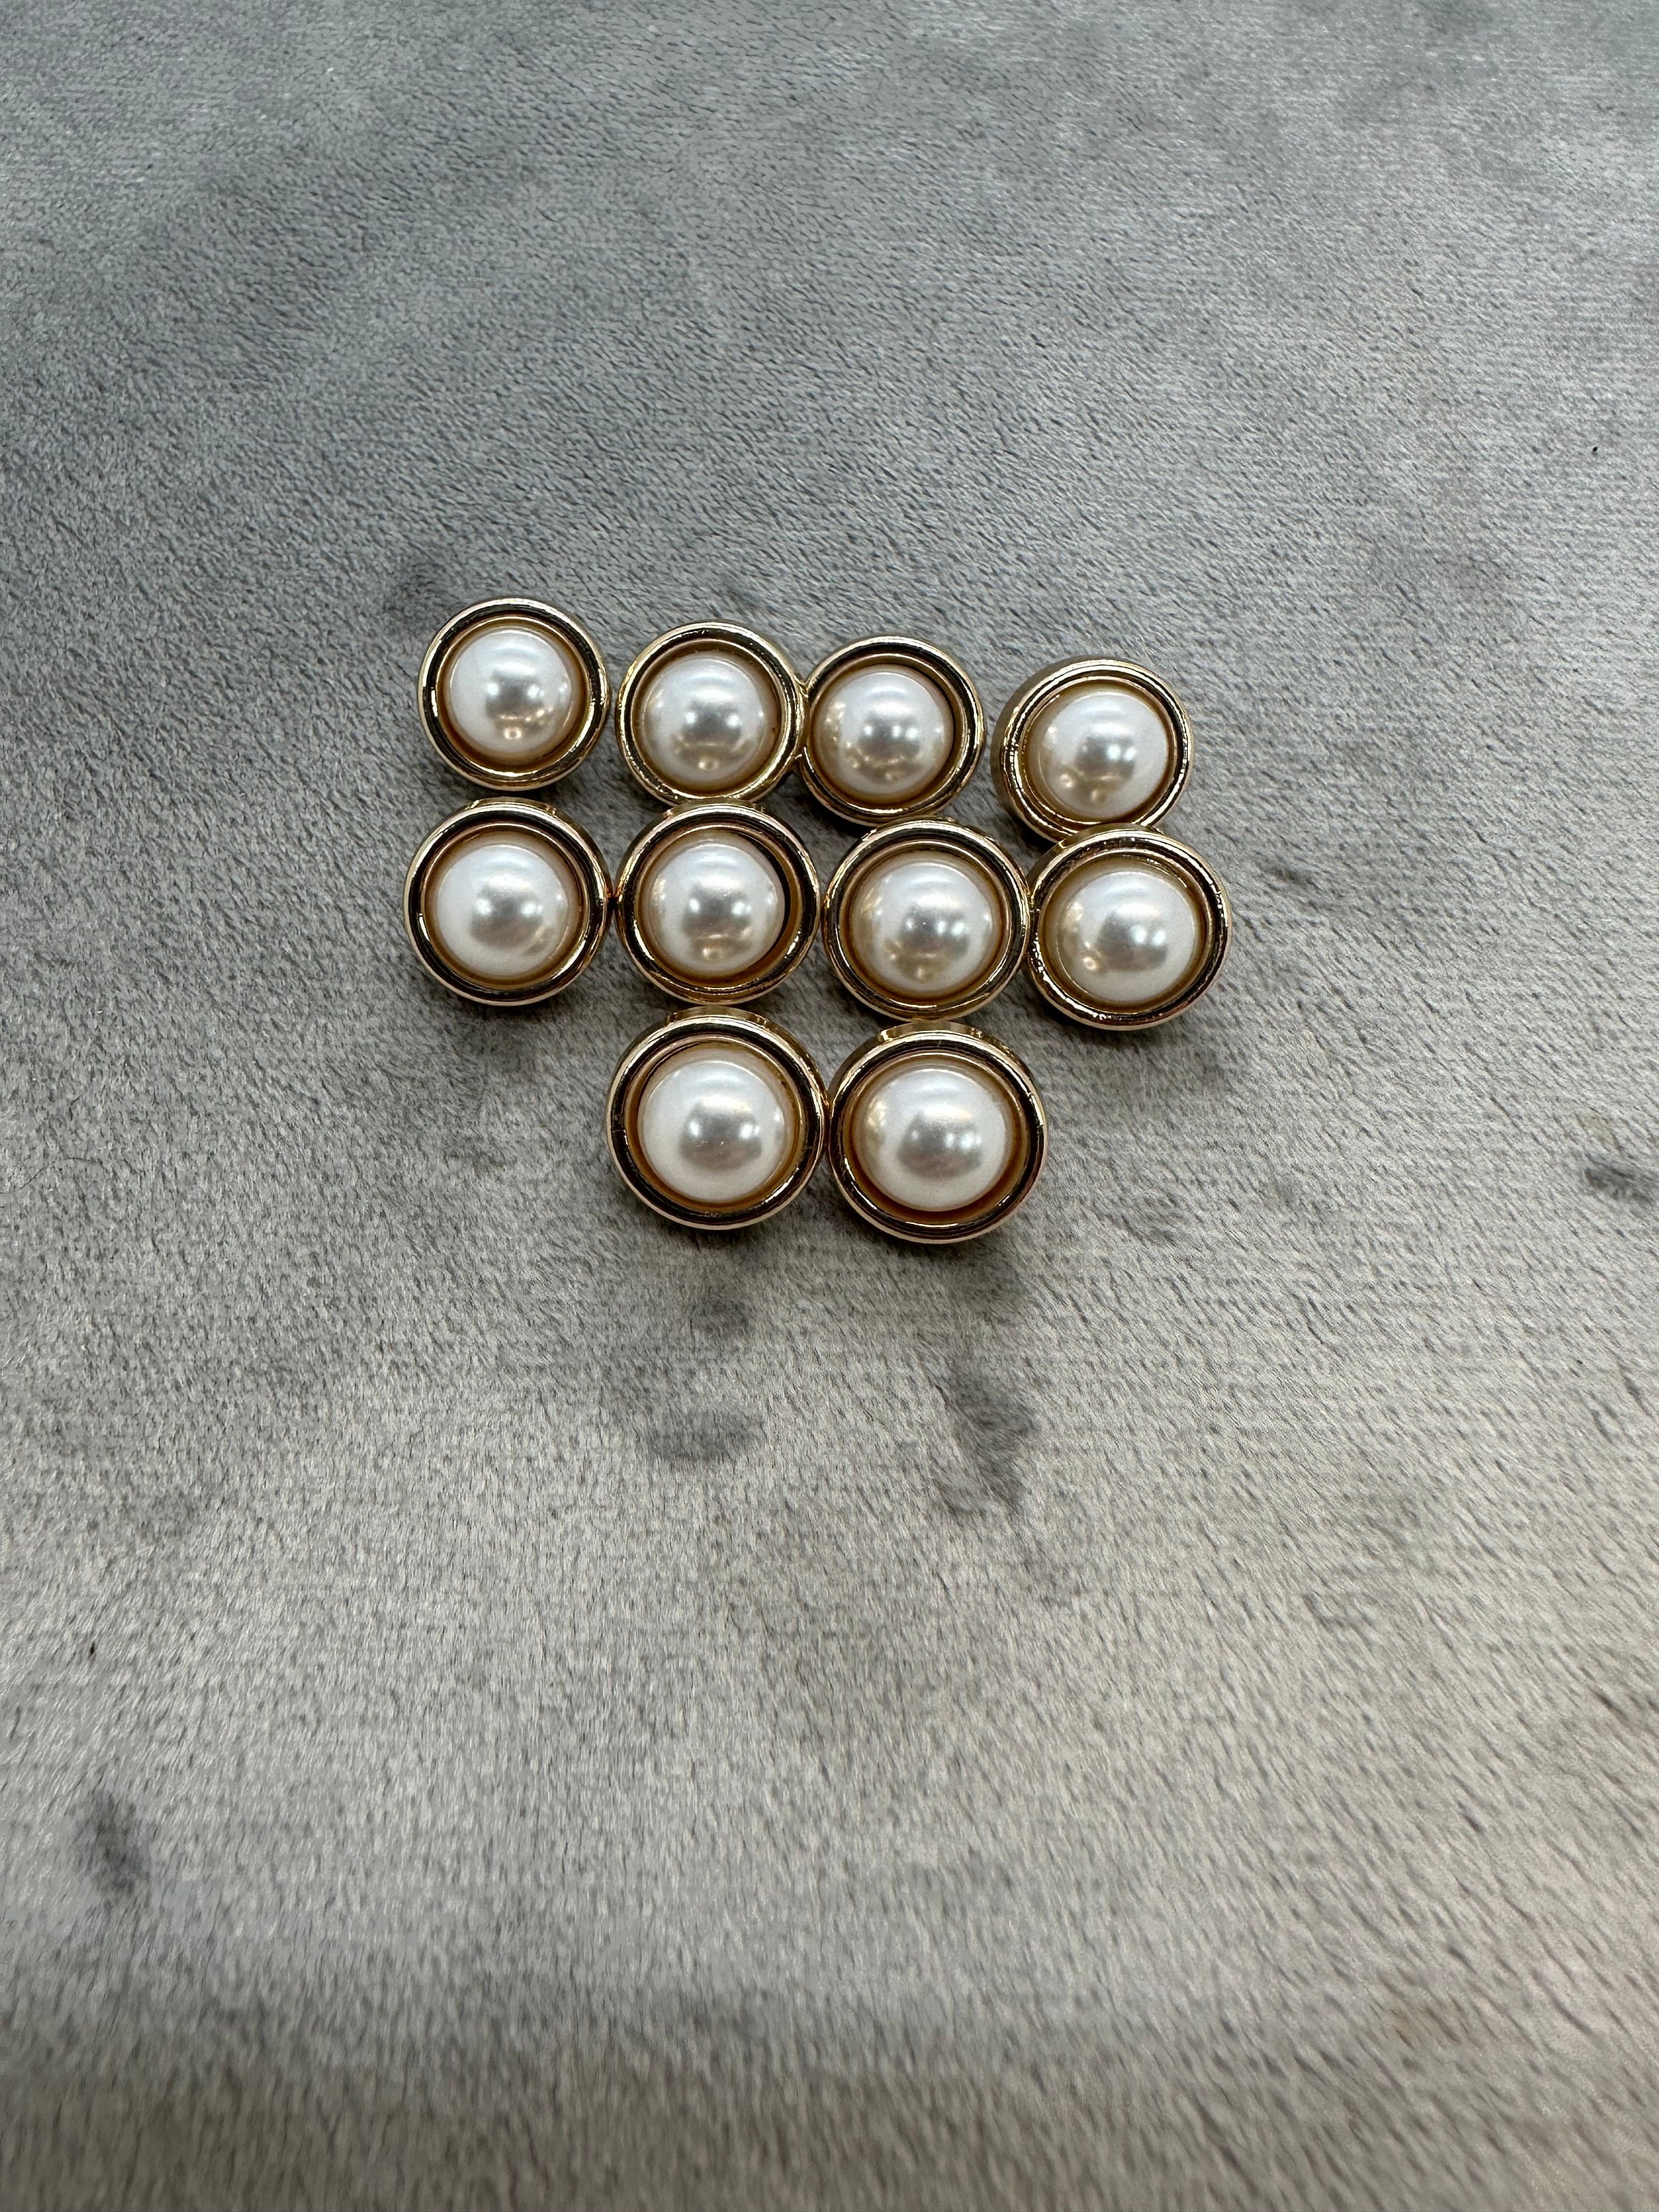 10, White and Gold Fancy Shank Buttons, Gold Metallic Heart Border Buttons,  White Fancy Style Buttons, White and Gold Shank Button 